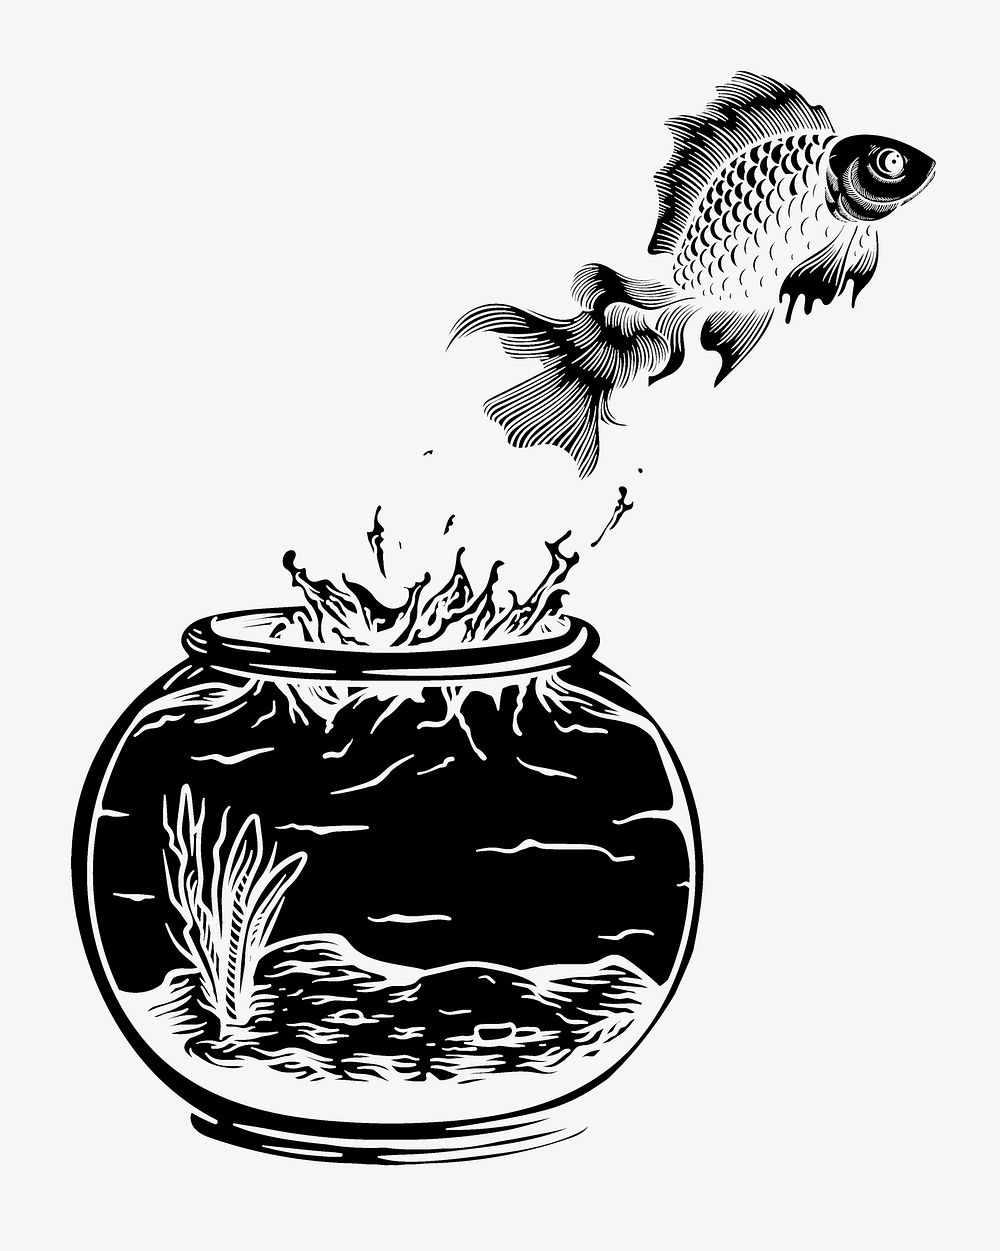 Fish escaping bowl sticker, animal isolated image psd